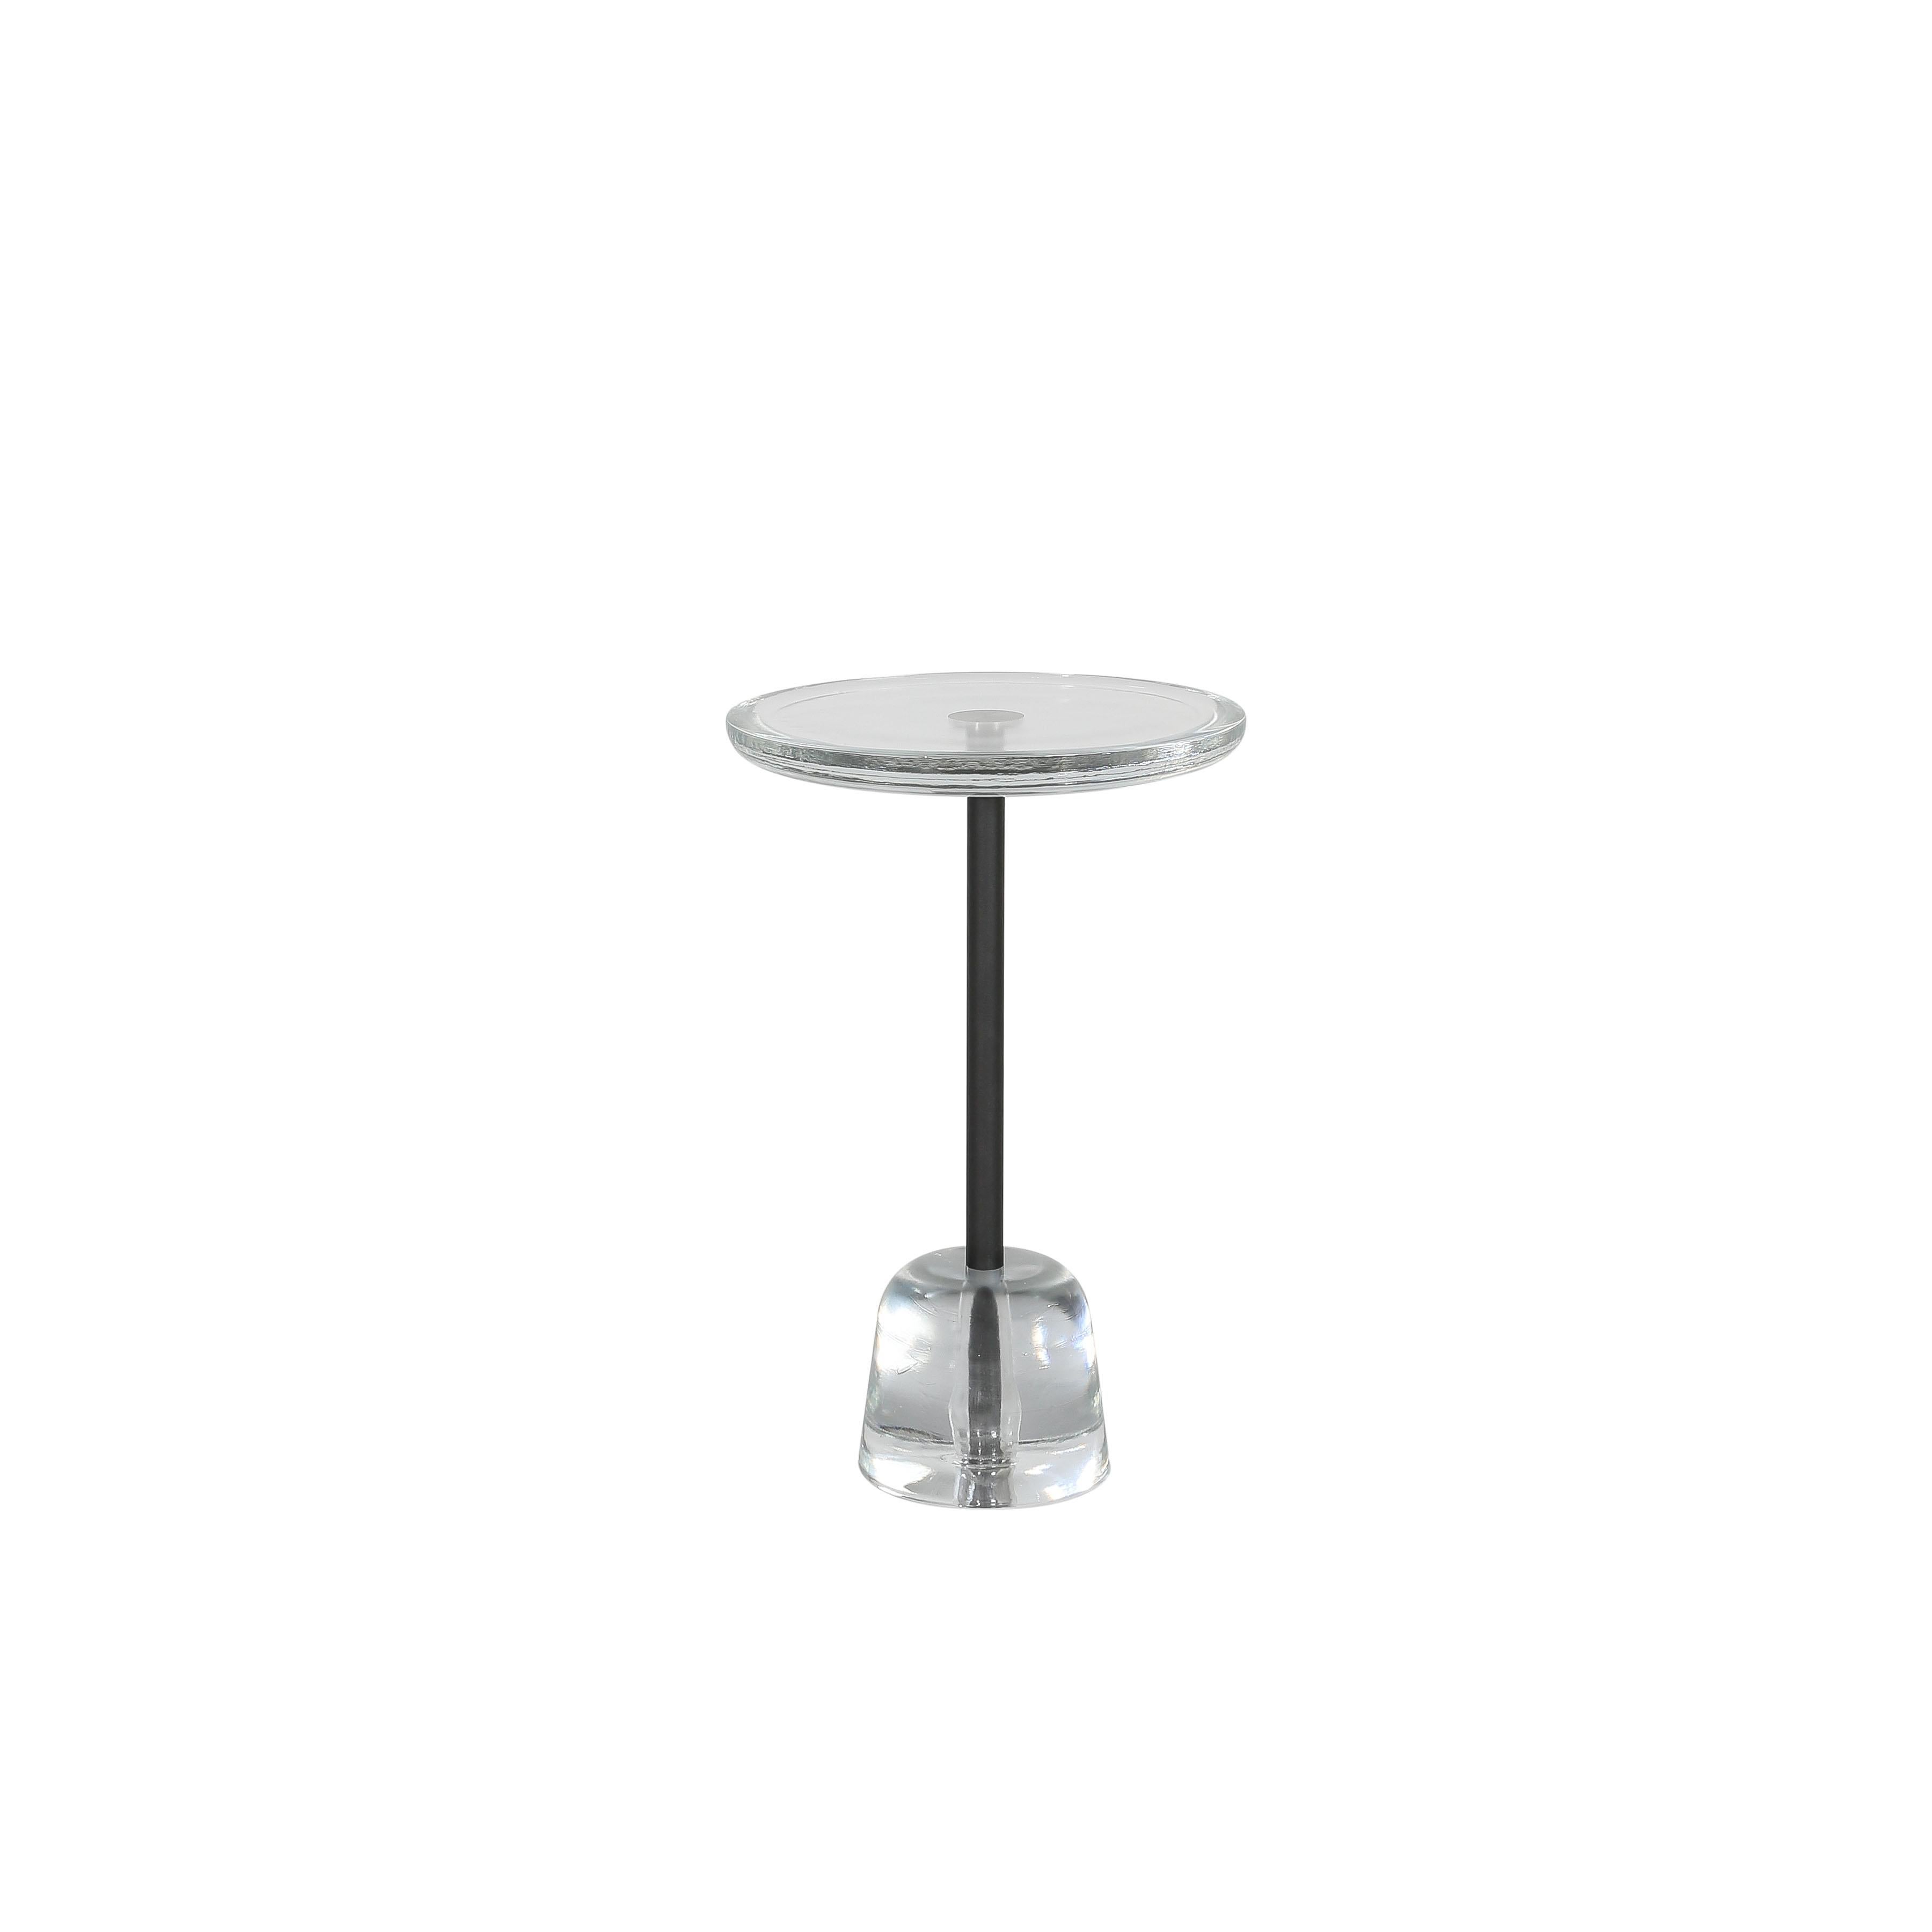 Pina high transparent black side table by Pulpo
Dimensions: D34 x H52 cm
Materials: glass; brass and steel

Also available in different colours. 

Sebastian Herkner’s distinctively tall, skinny side table series pina is inspired by the